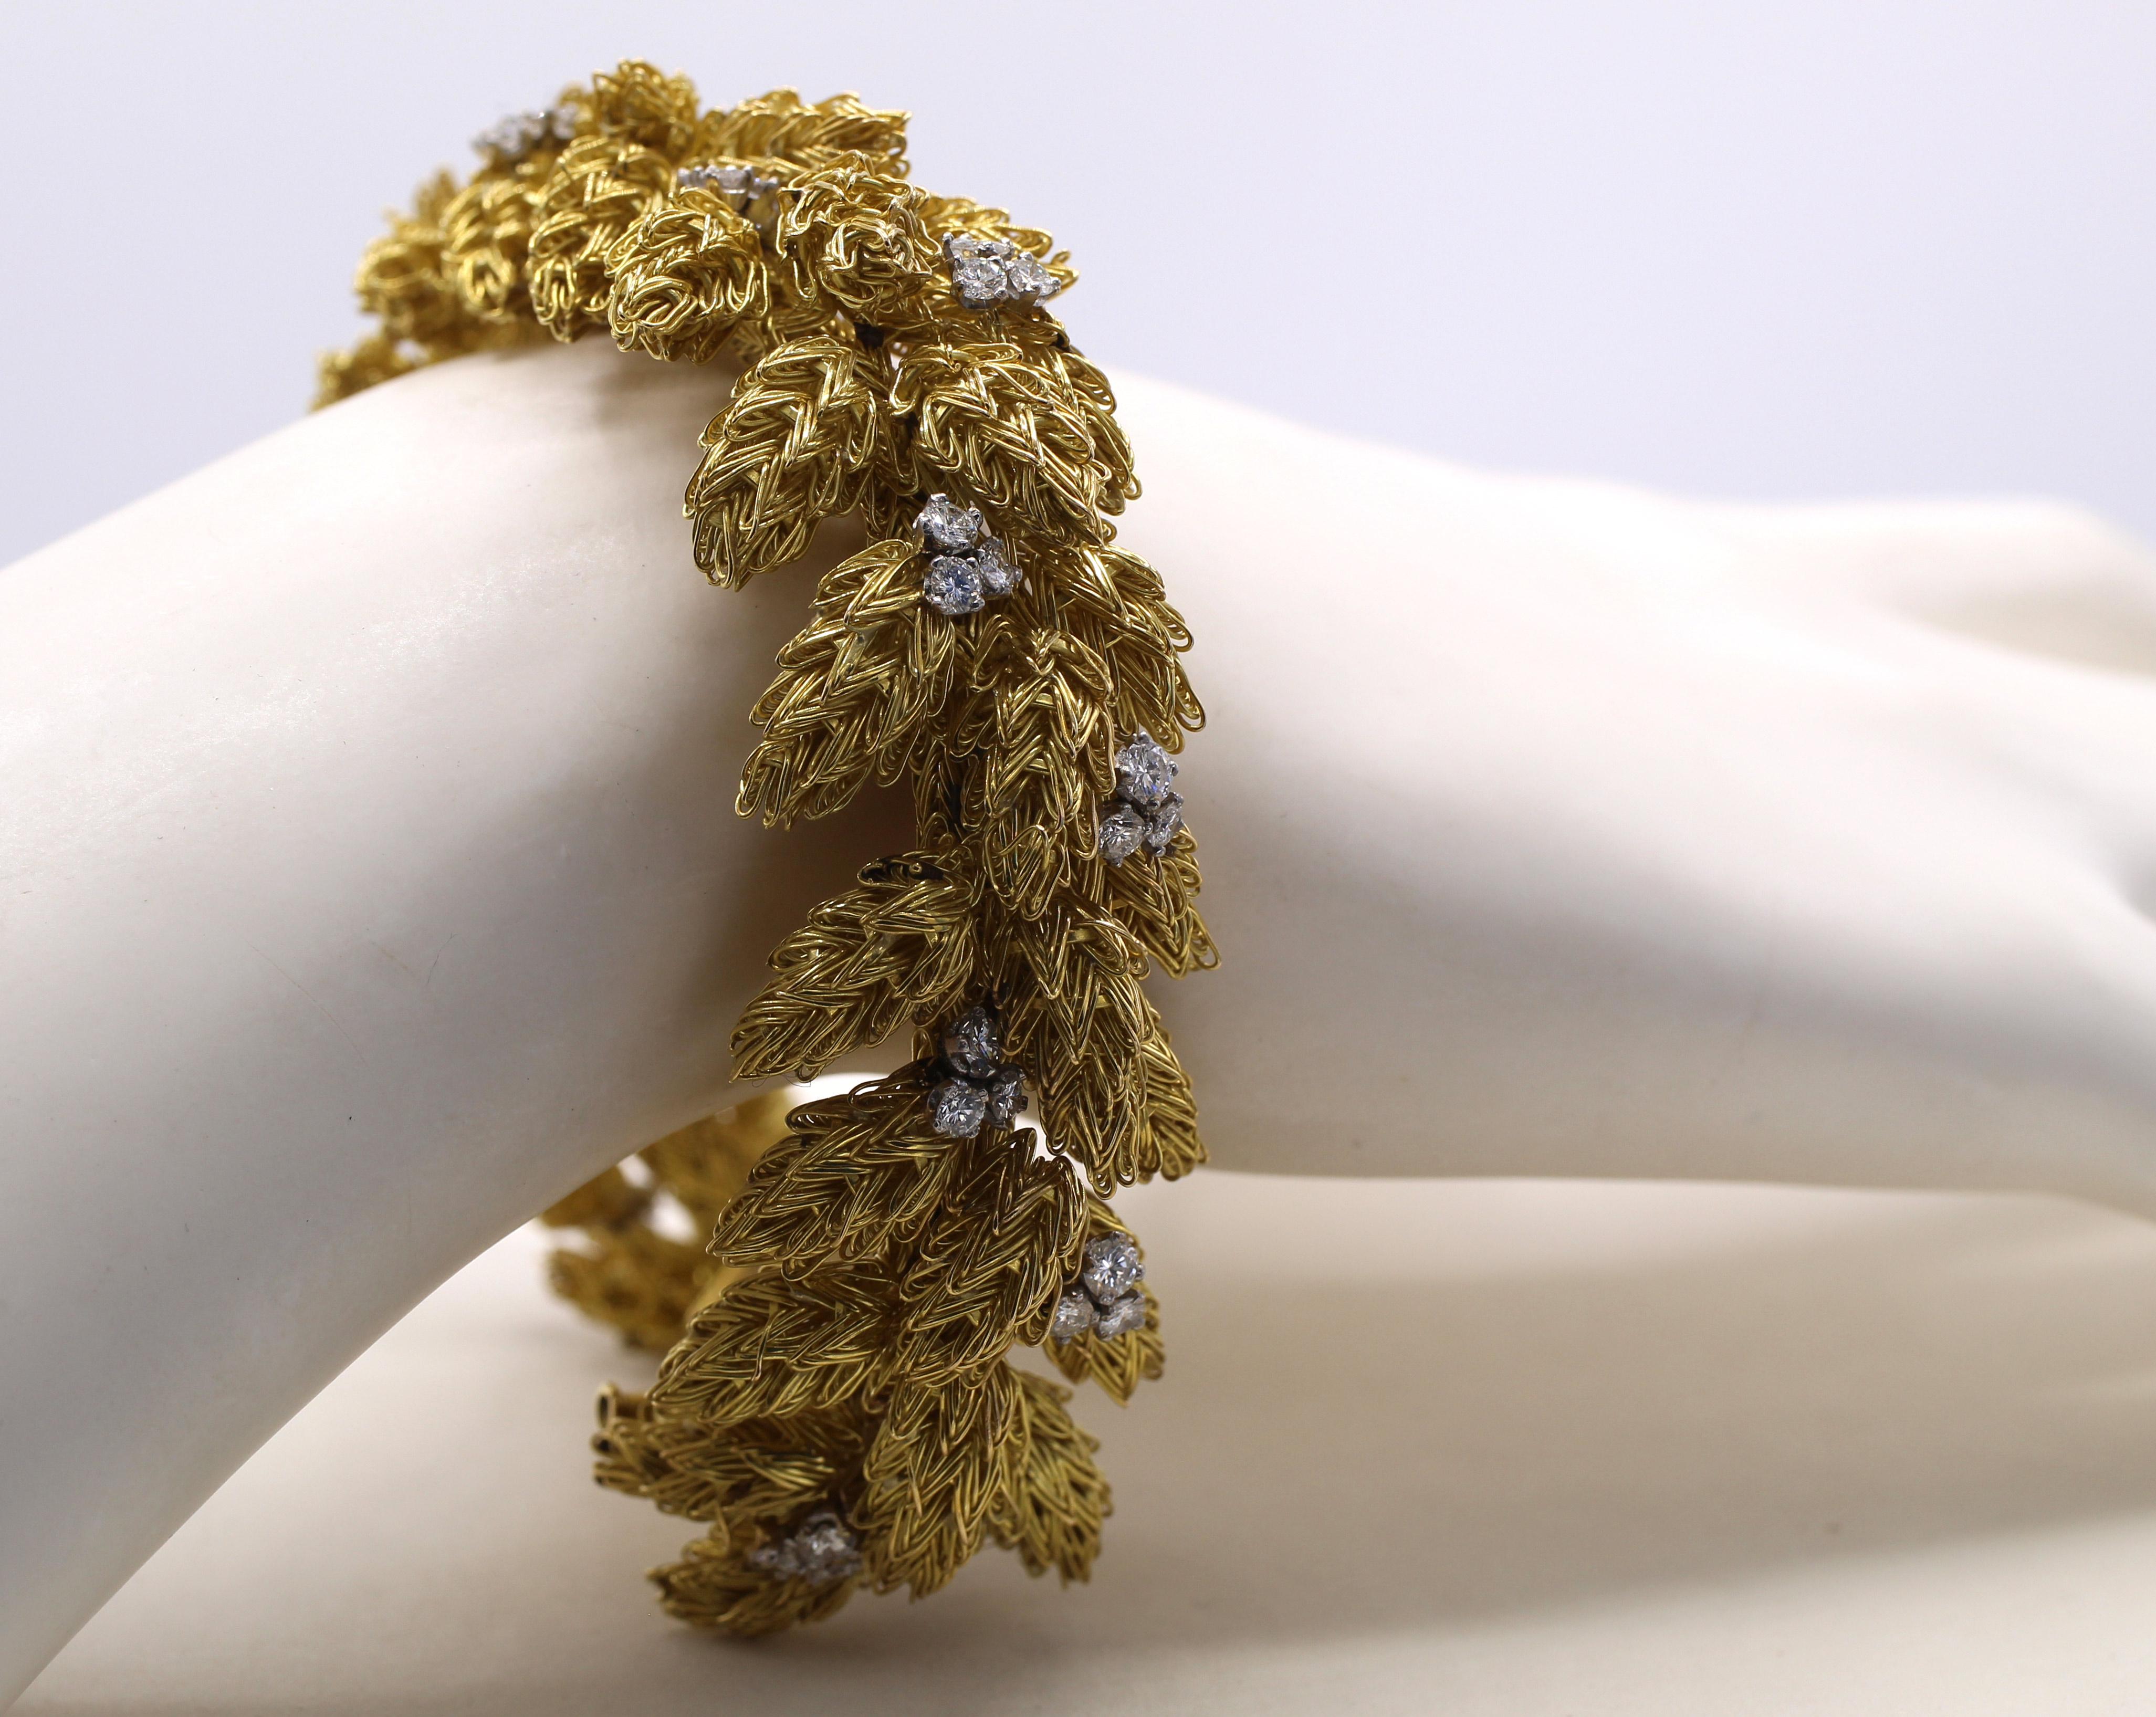 Magnificently designed and exceptionally well handcrafted this unique 1970s bracelet has been fashioned to appear like a bed of feathers on the wrist. Literally thousands of fine handcrafted gold wires have been assembled into 48 elements on various